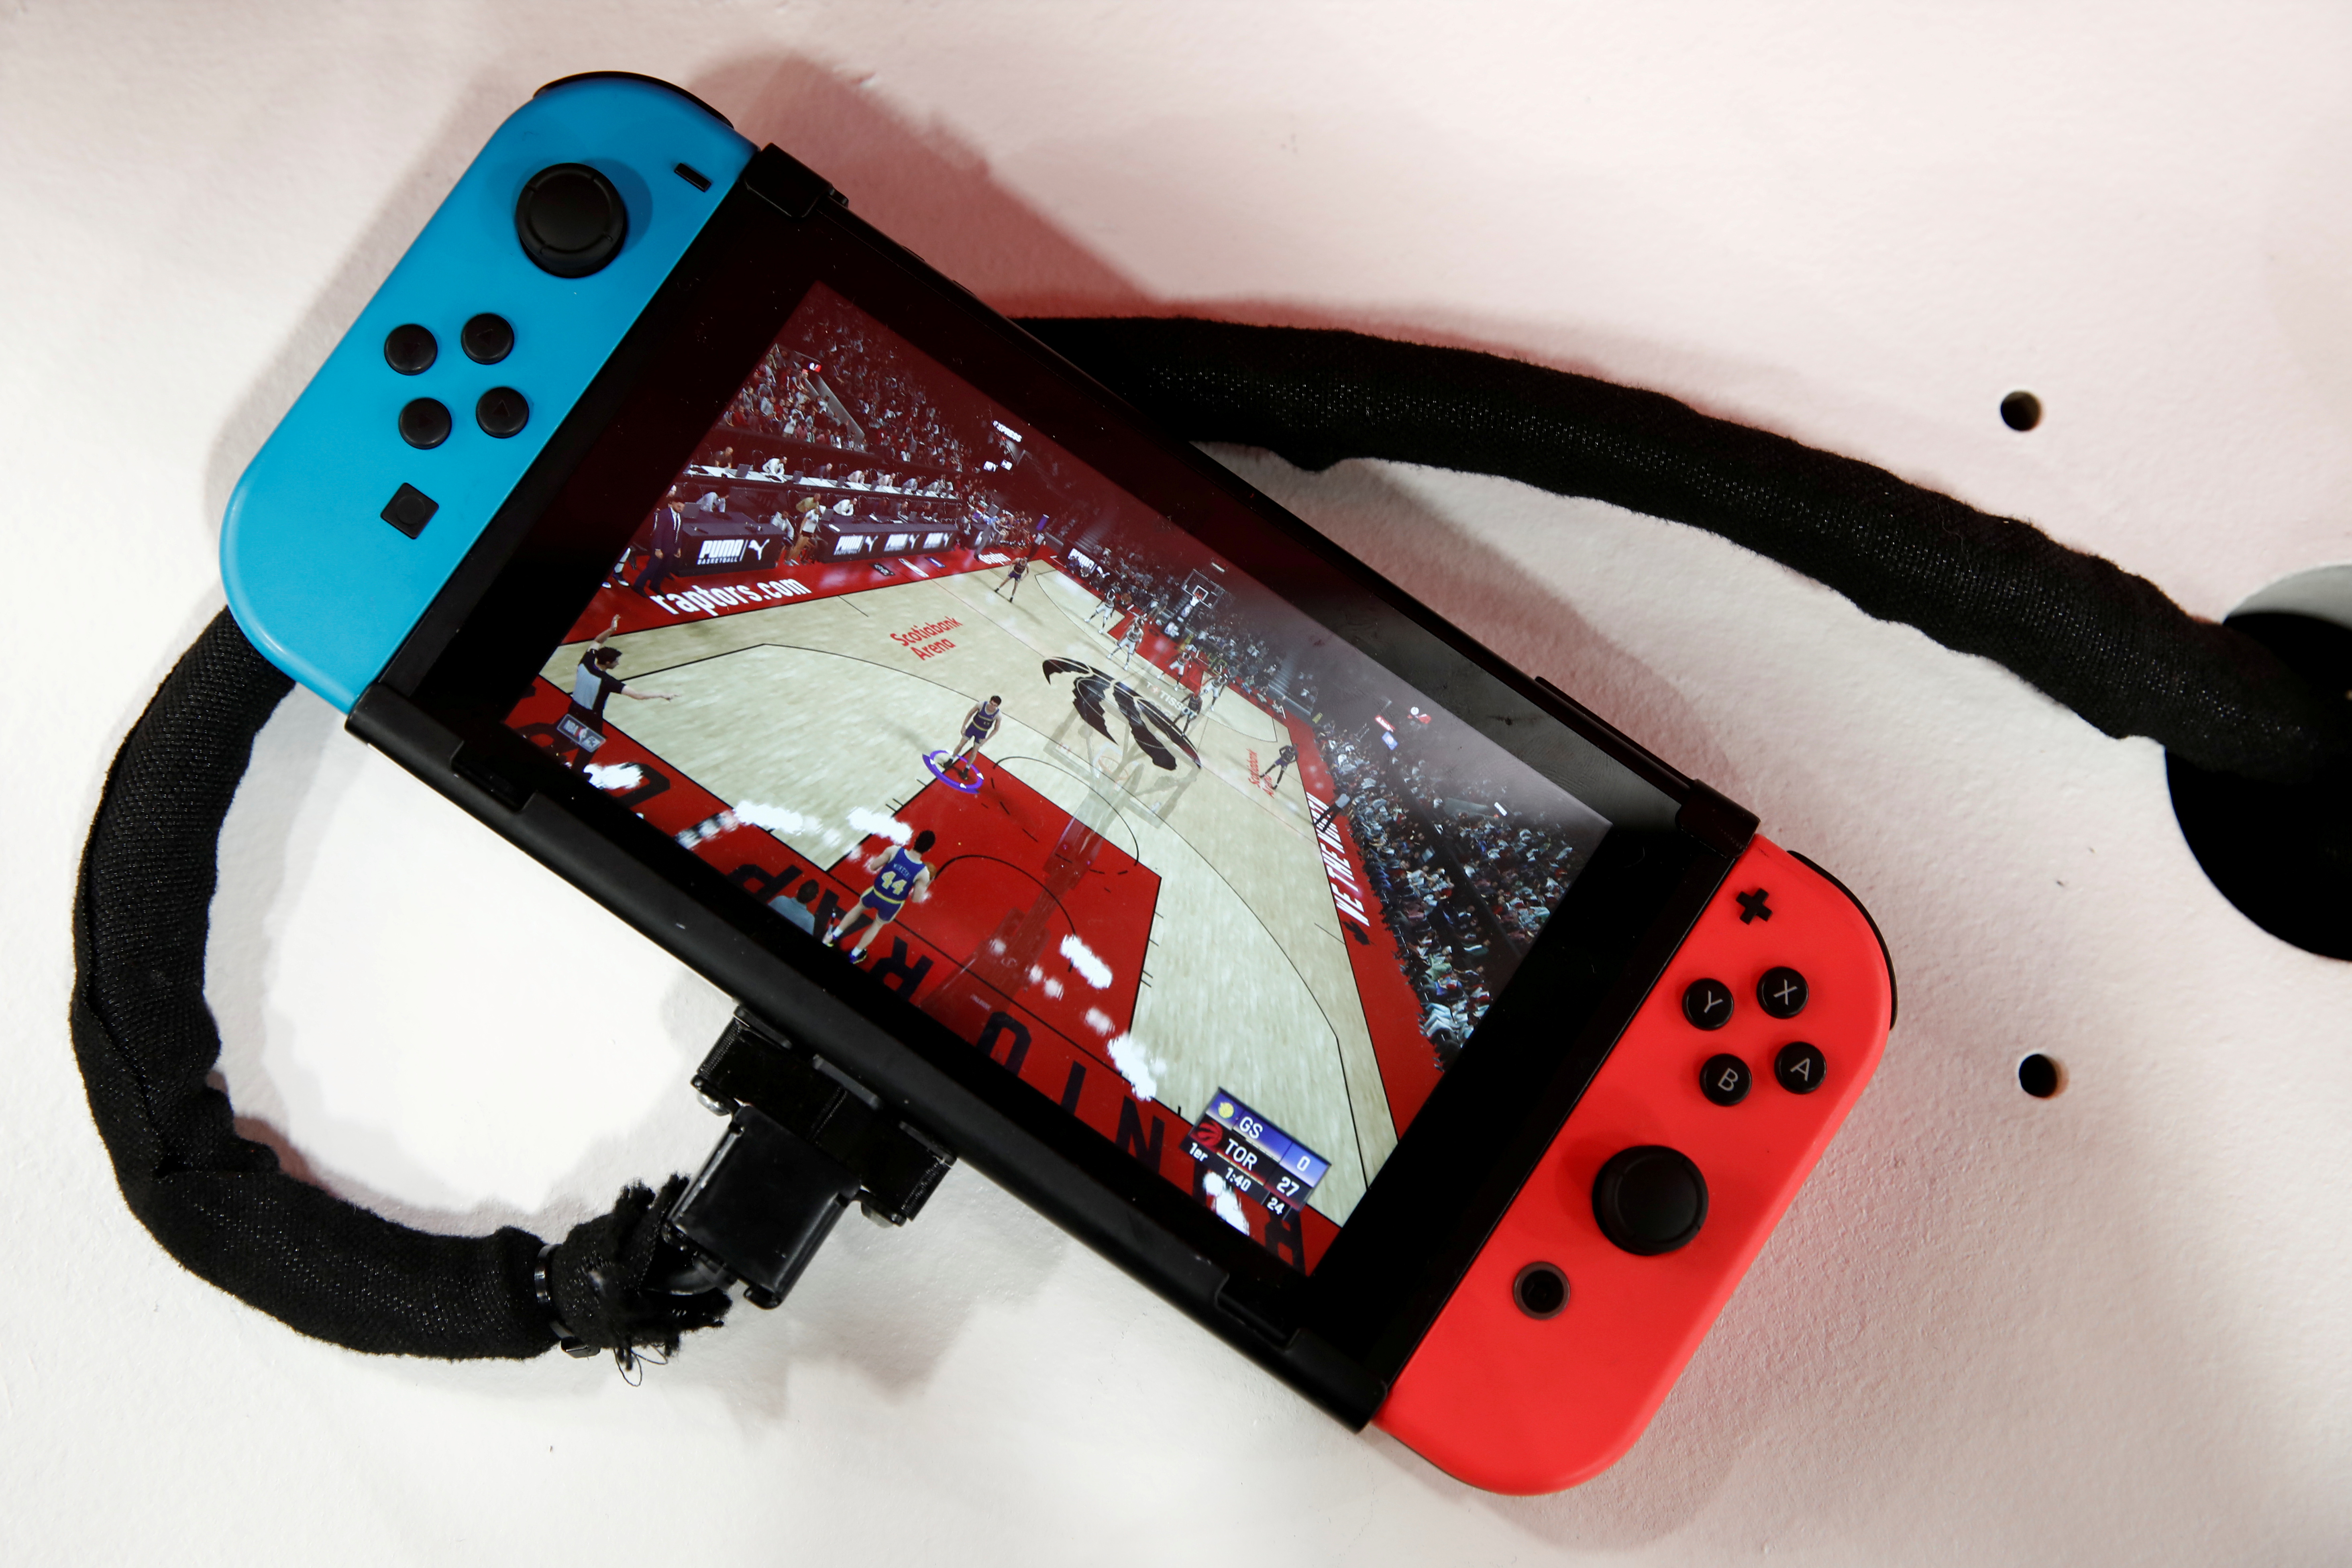 Nintendo has no plans for Nintendo Switch price cuts